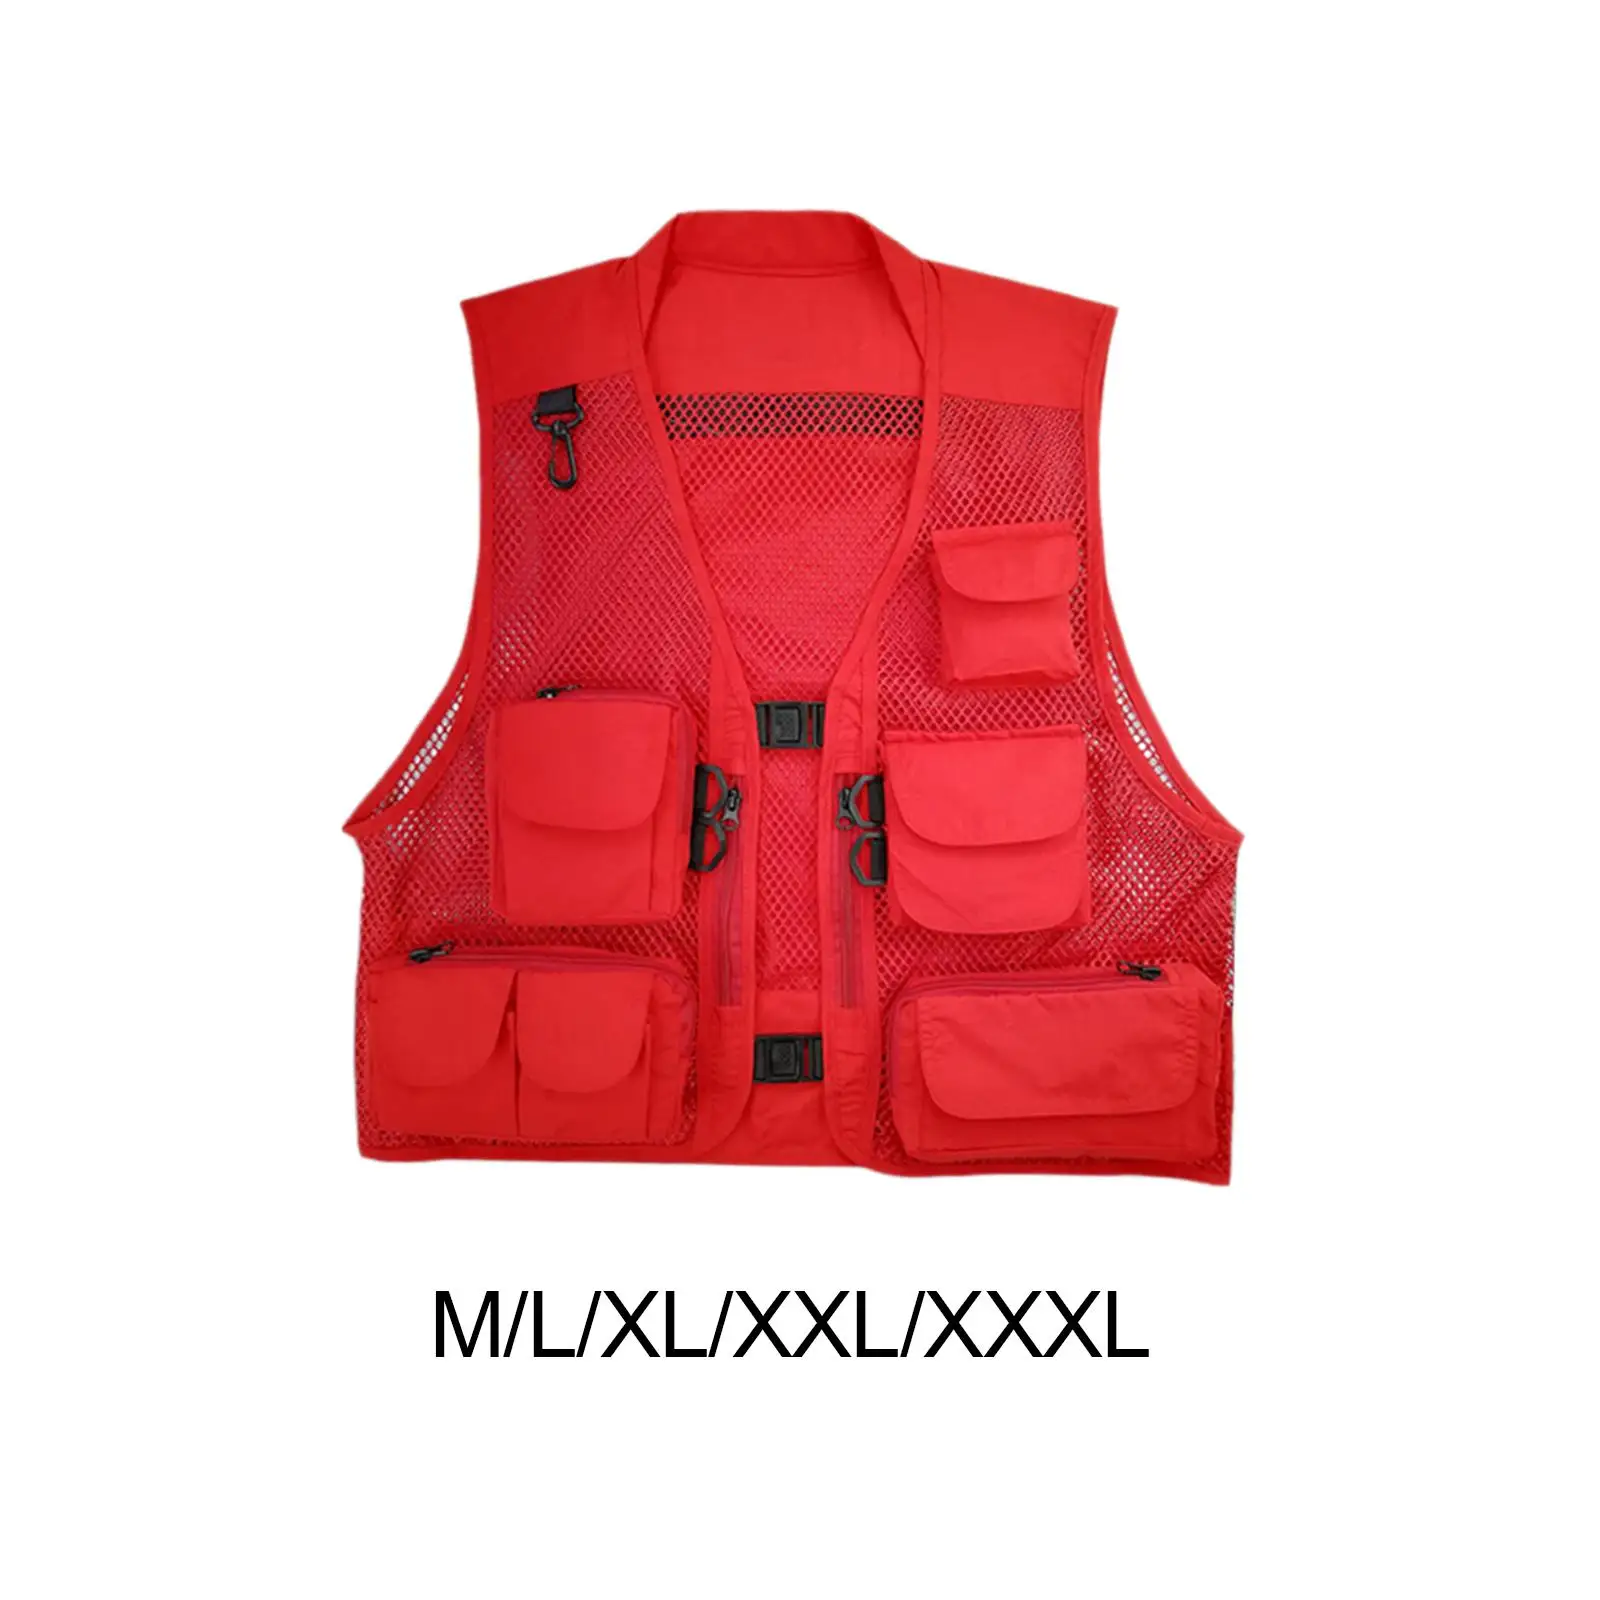 Mesh Fishing Photography Vest Multi Zipper Pockets for Sightseeing,Traveling